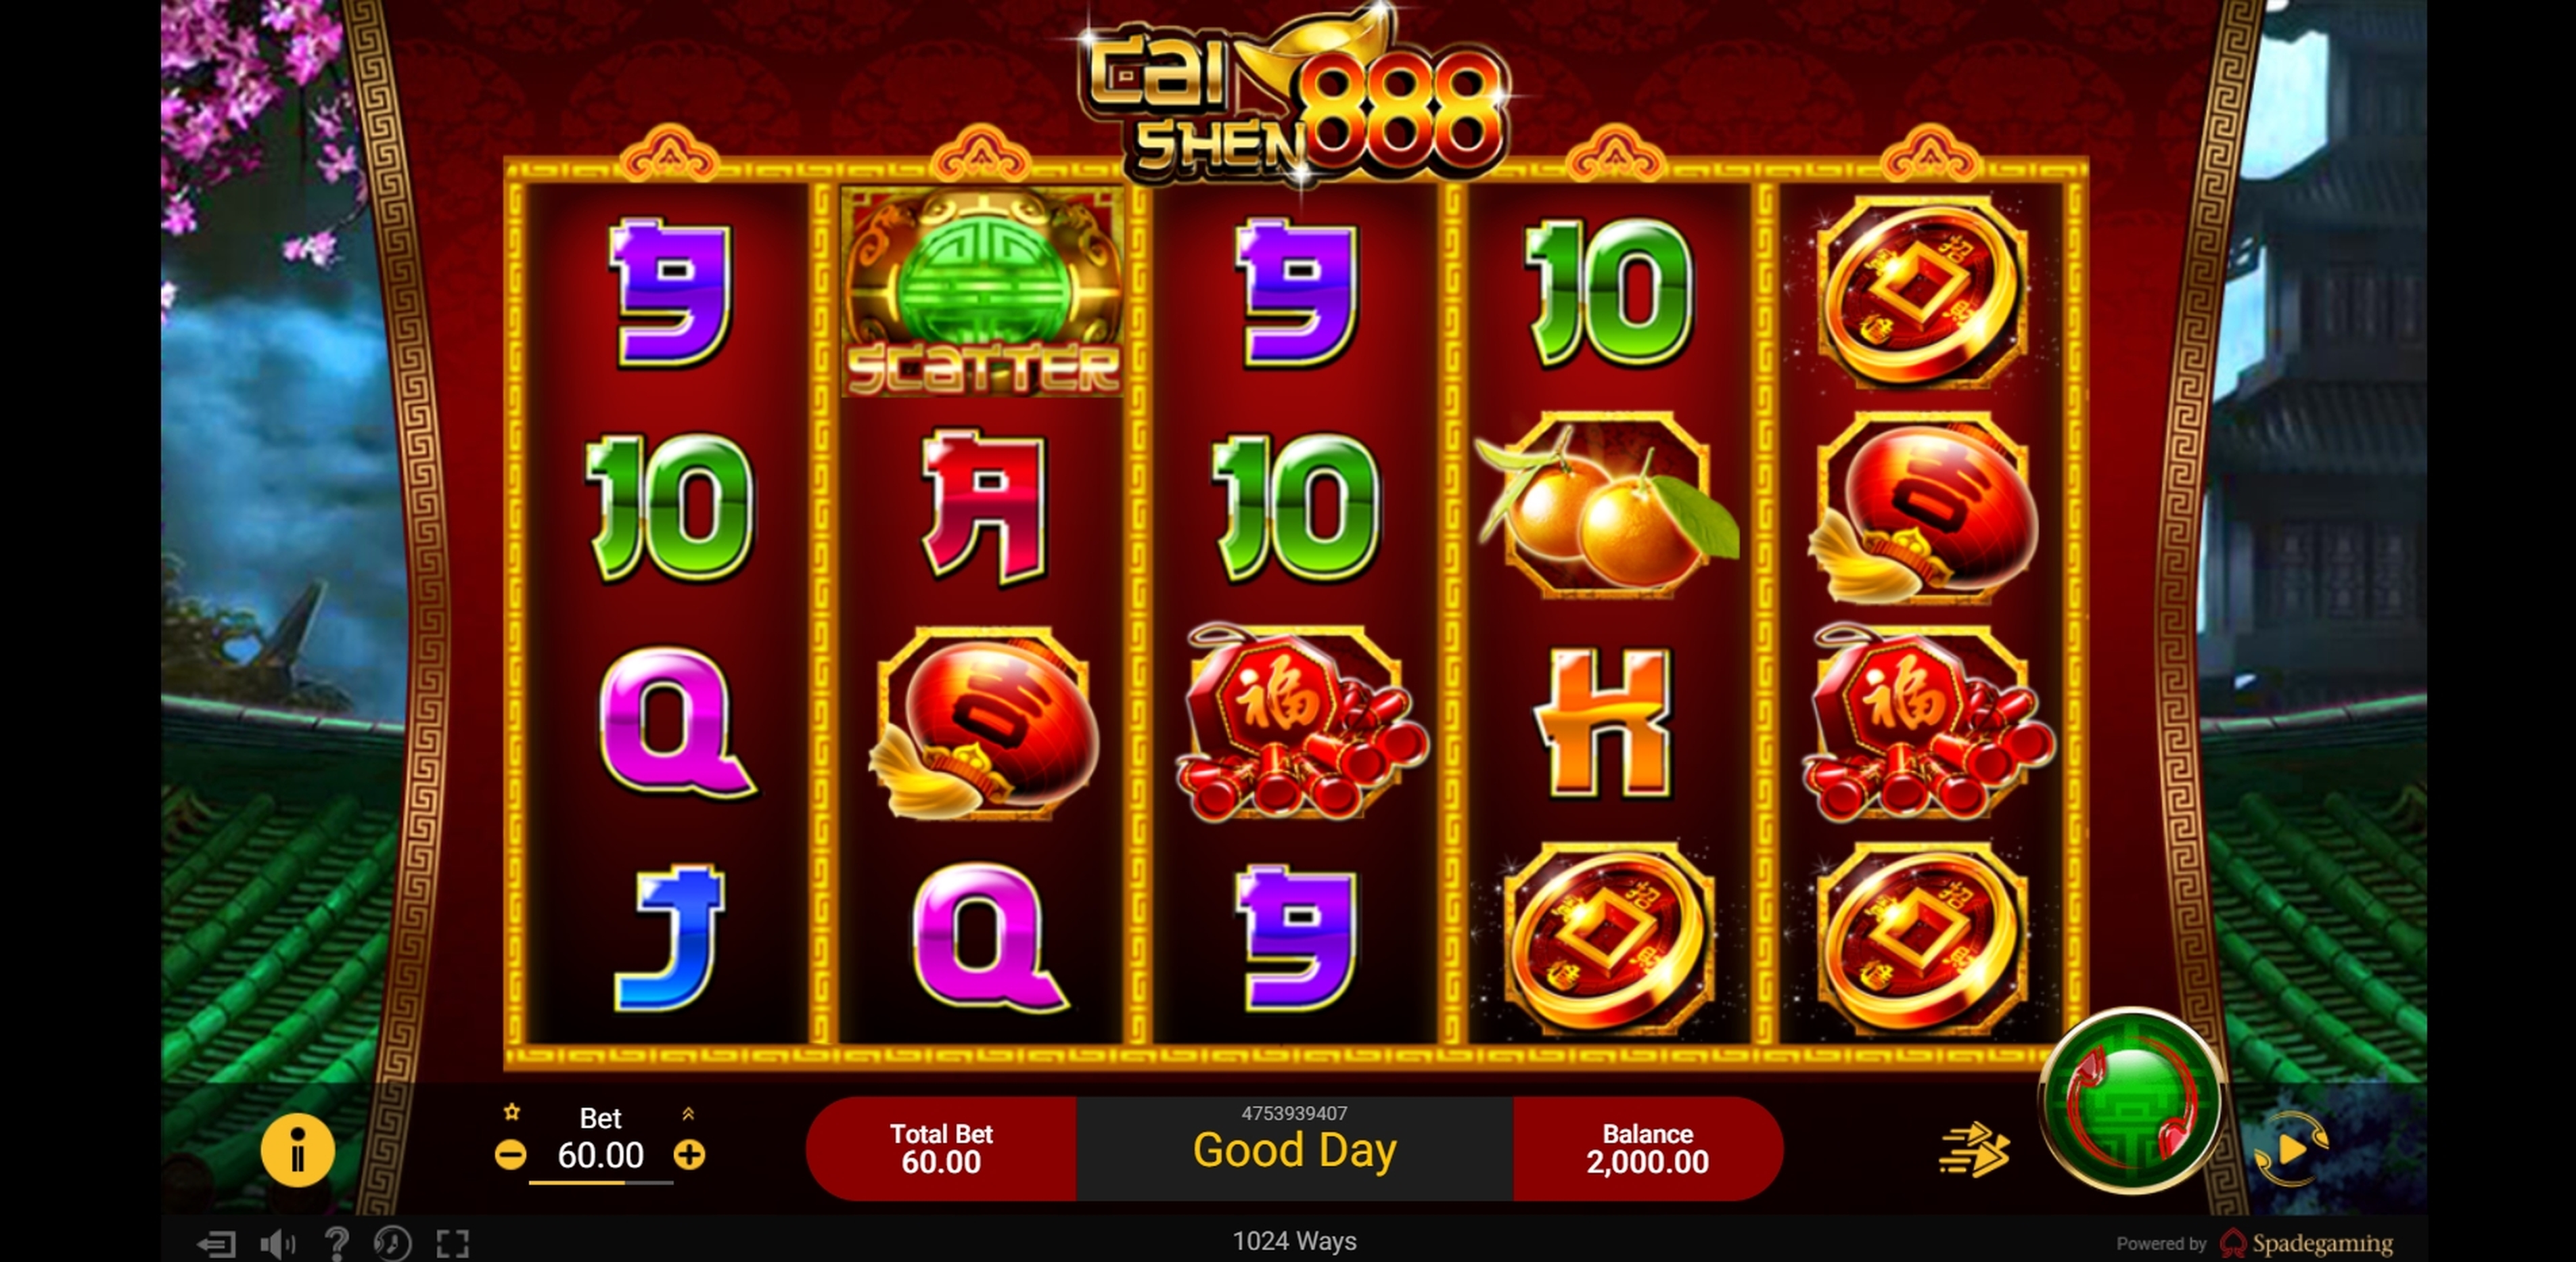 Reels in Cai Shen 888 Slot Game by Spade Gaming